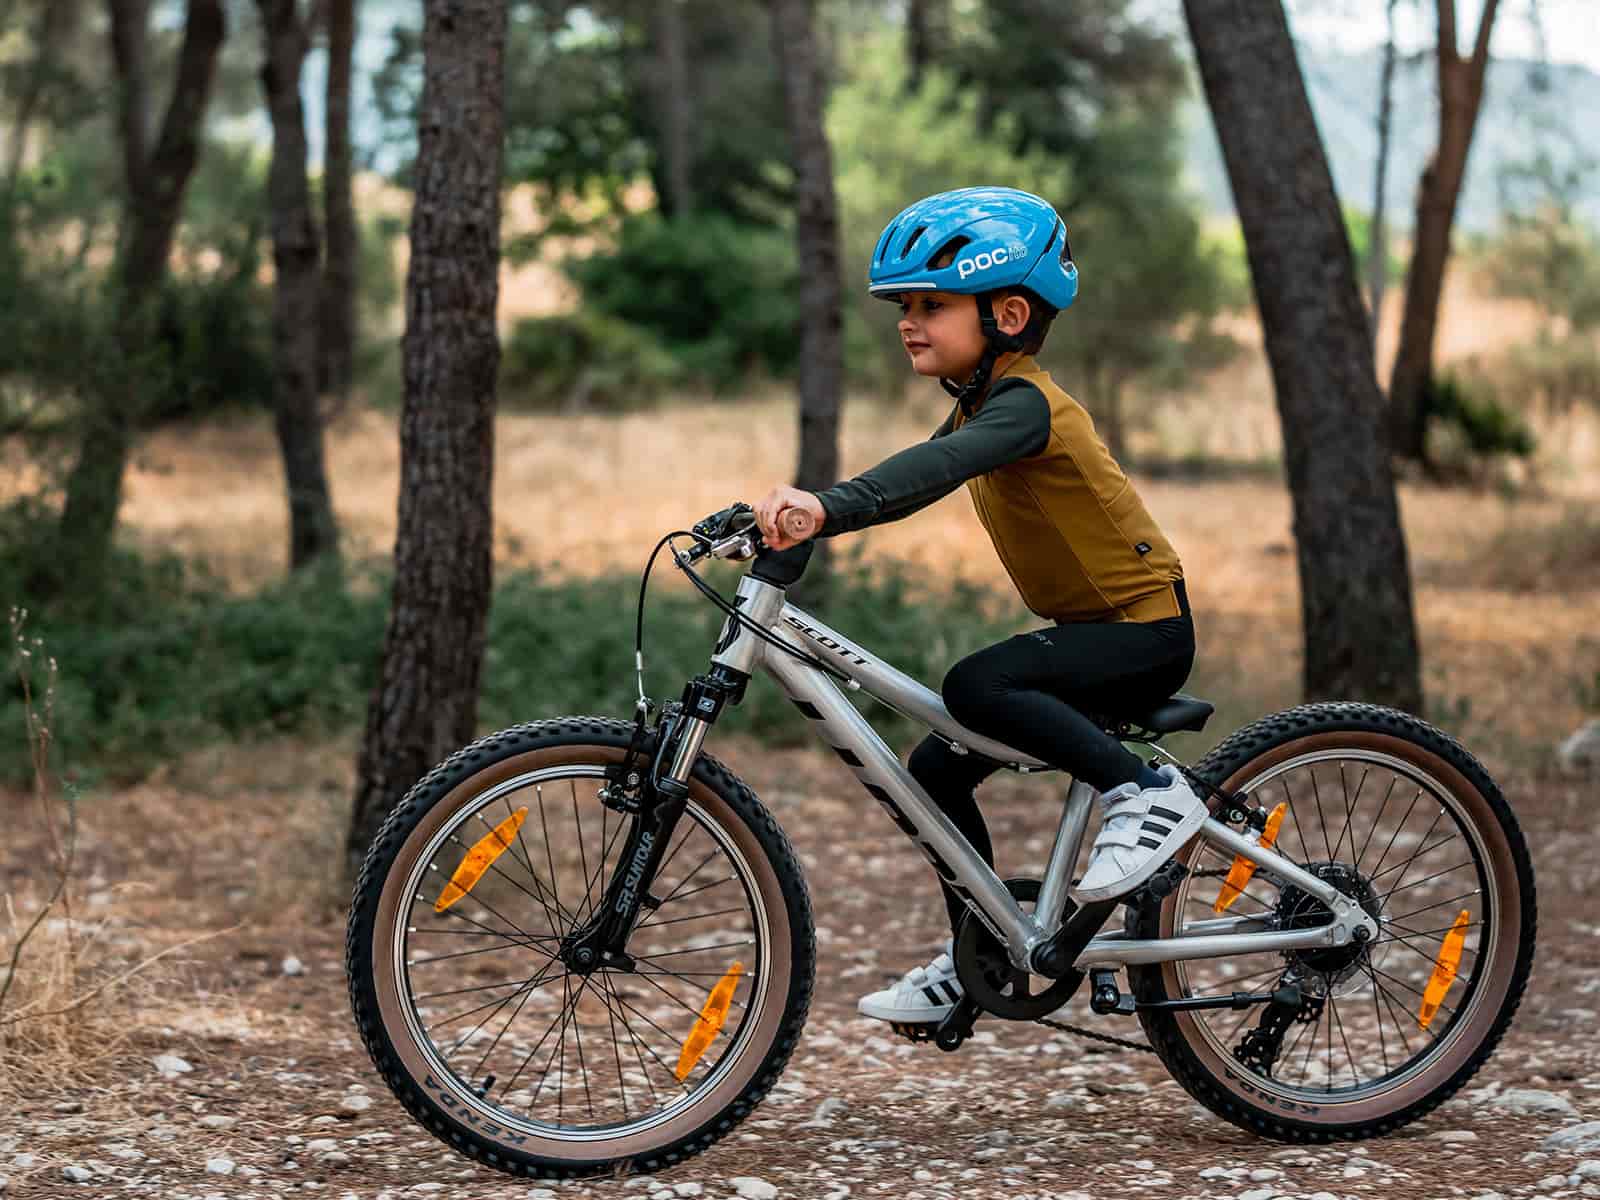 NEW CHILDREN'S CYCLING CLOTHING COLLECTION